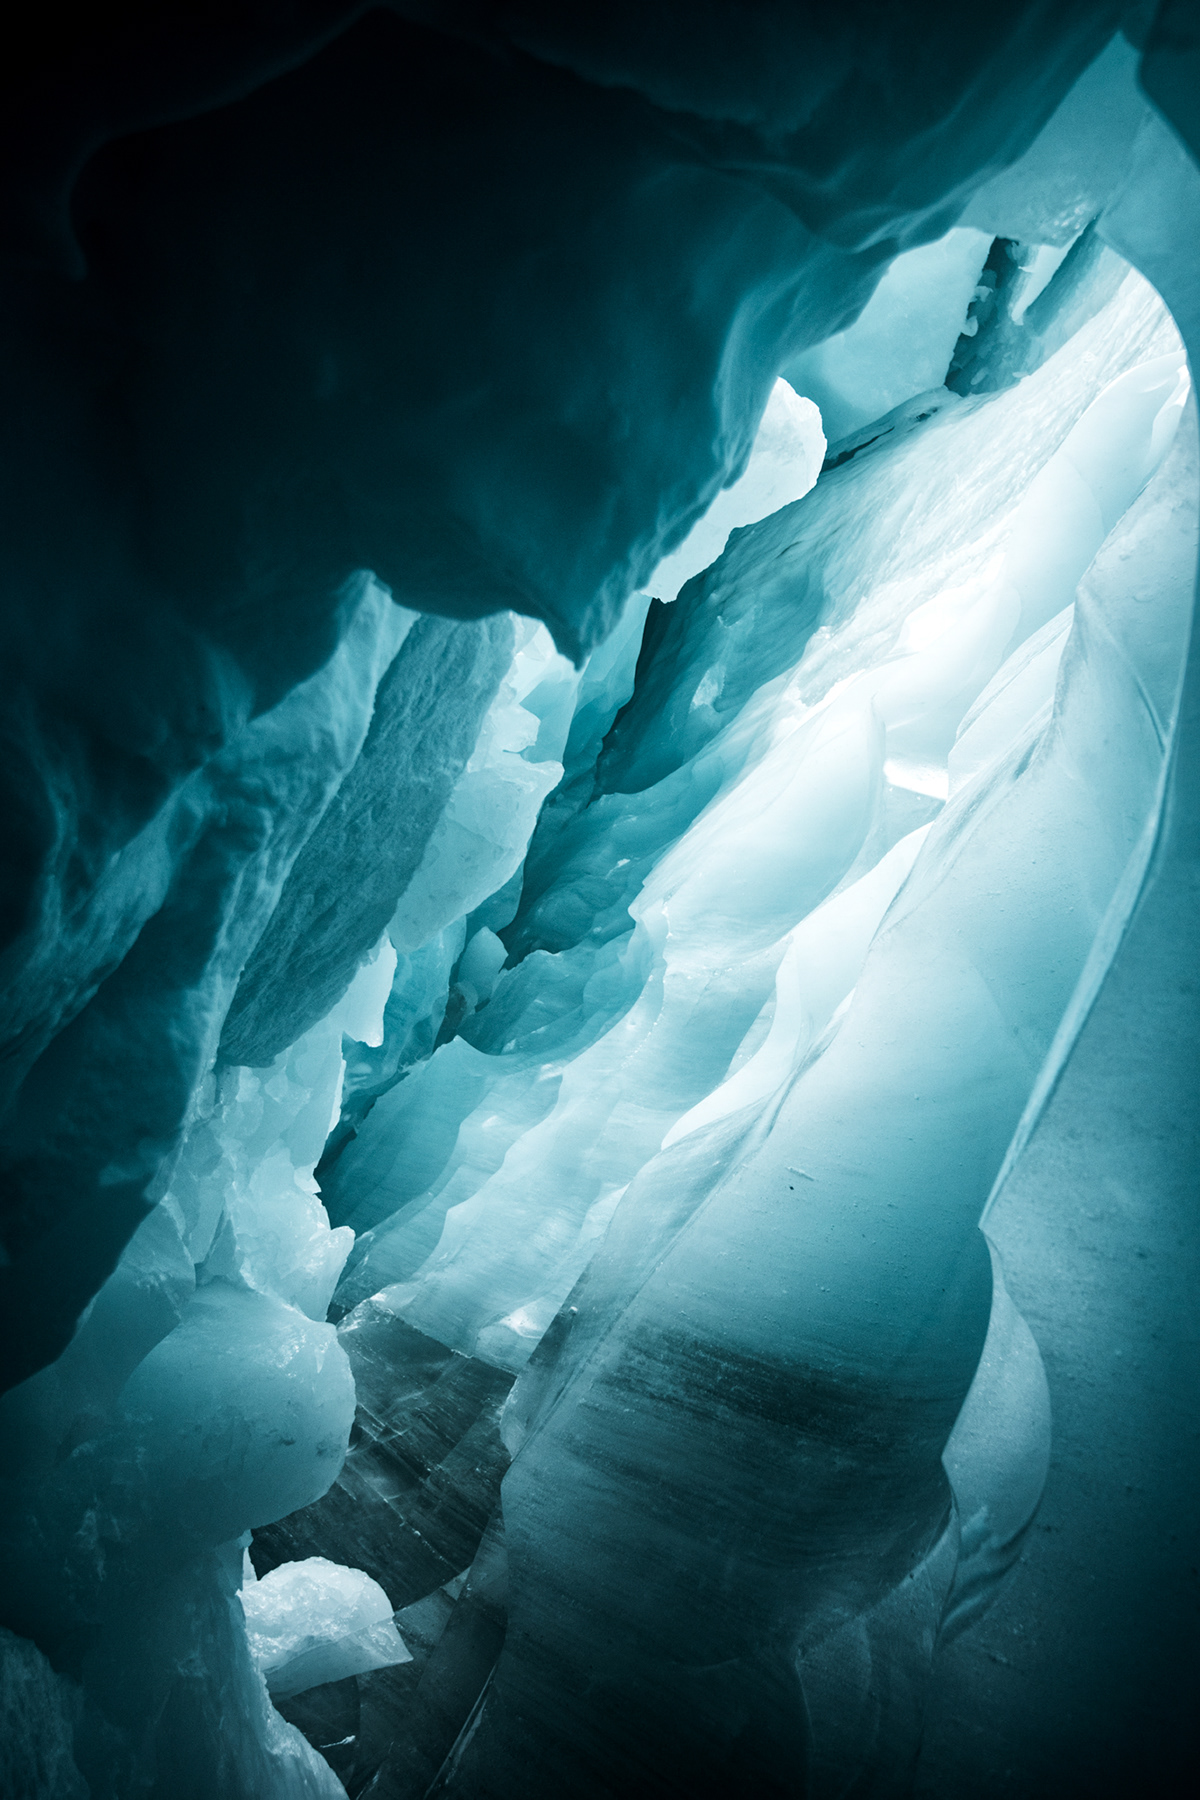 Val Rosegg Switzerland glacier climate change beauty blue Ice Caves Nature